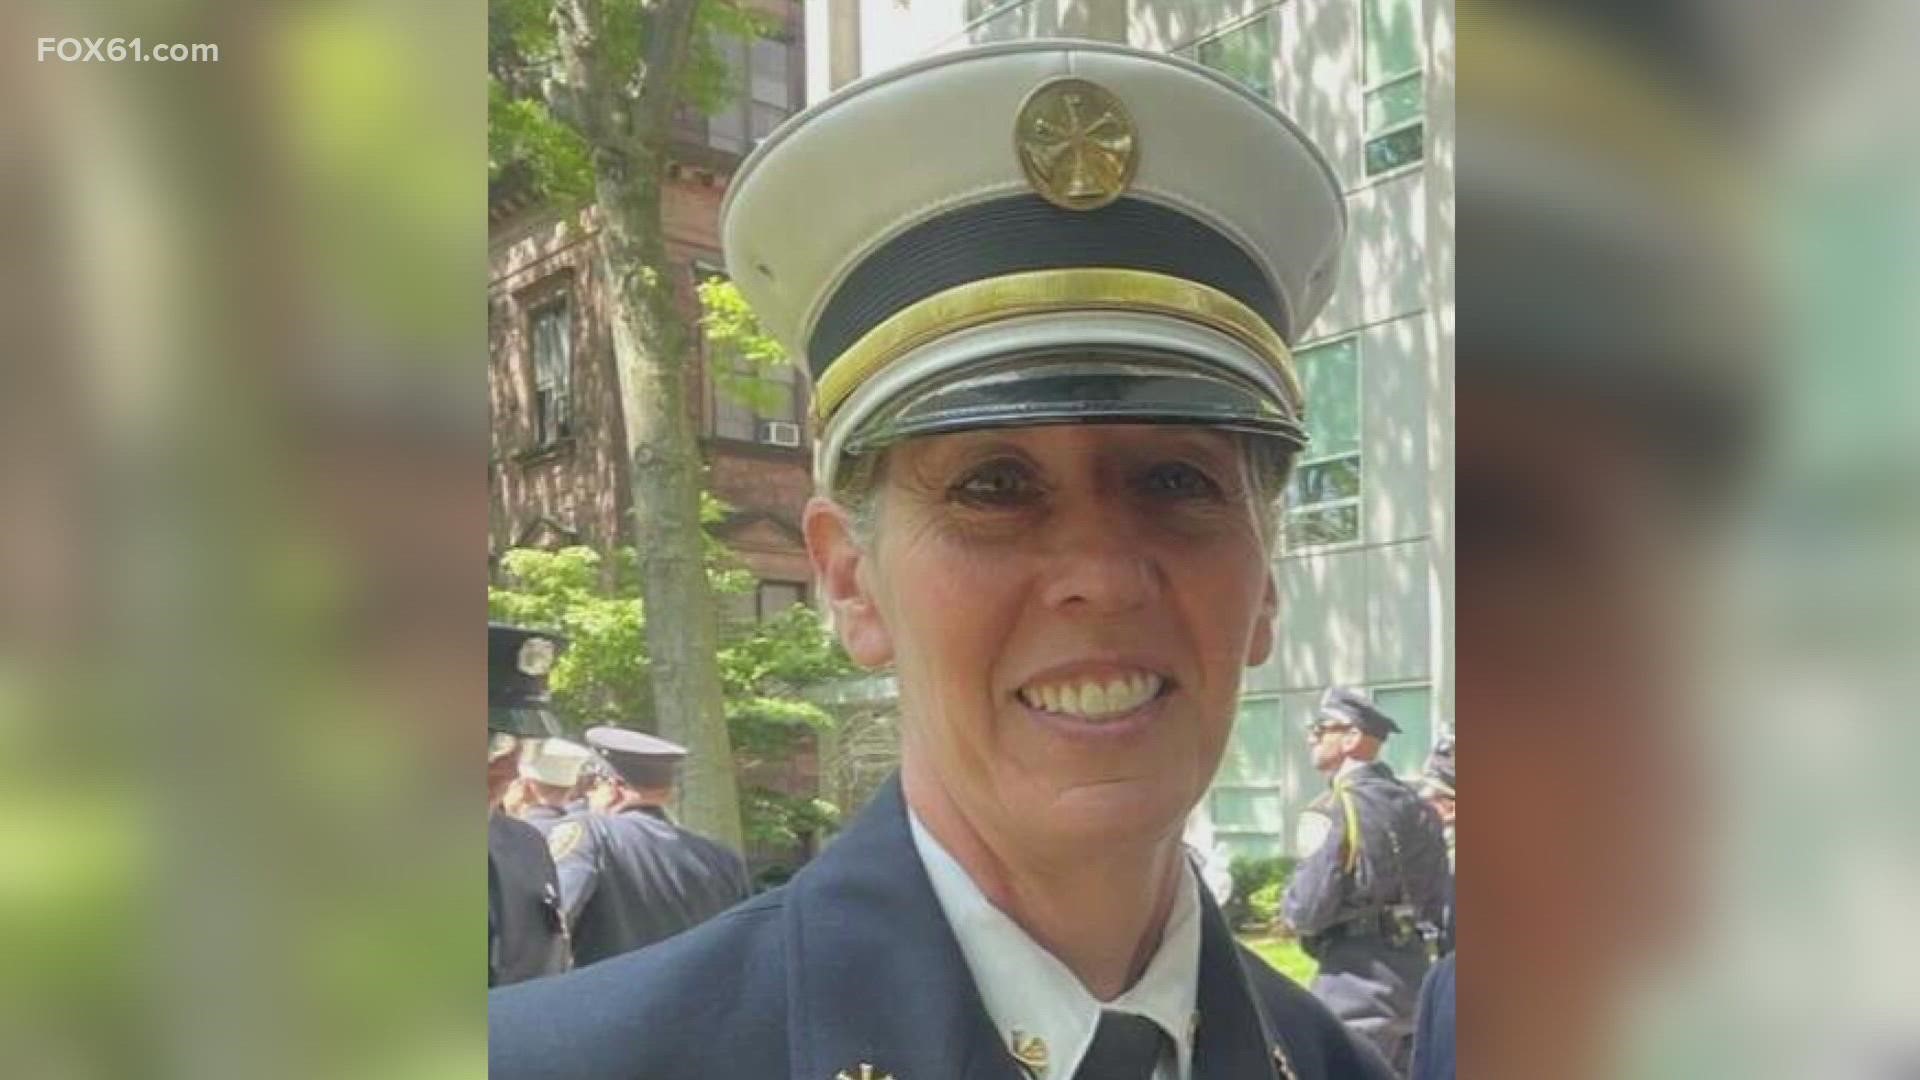 She was the first career woman firefighter in East Haven